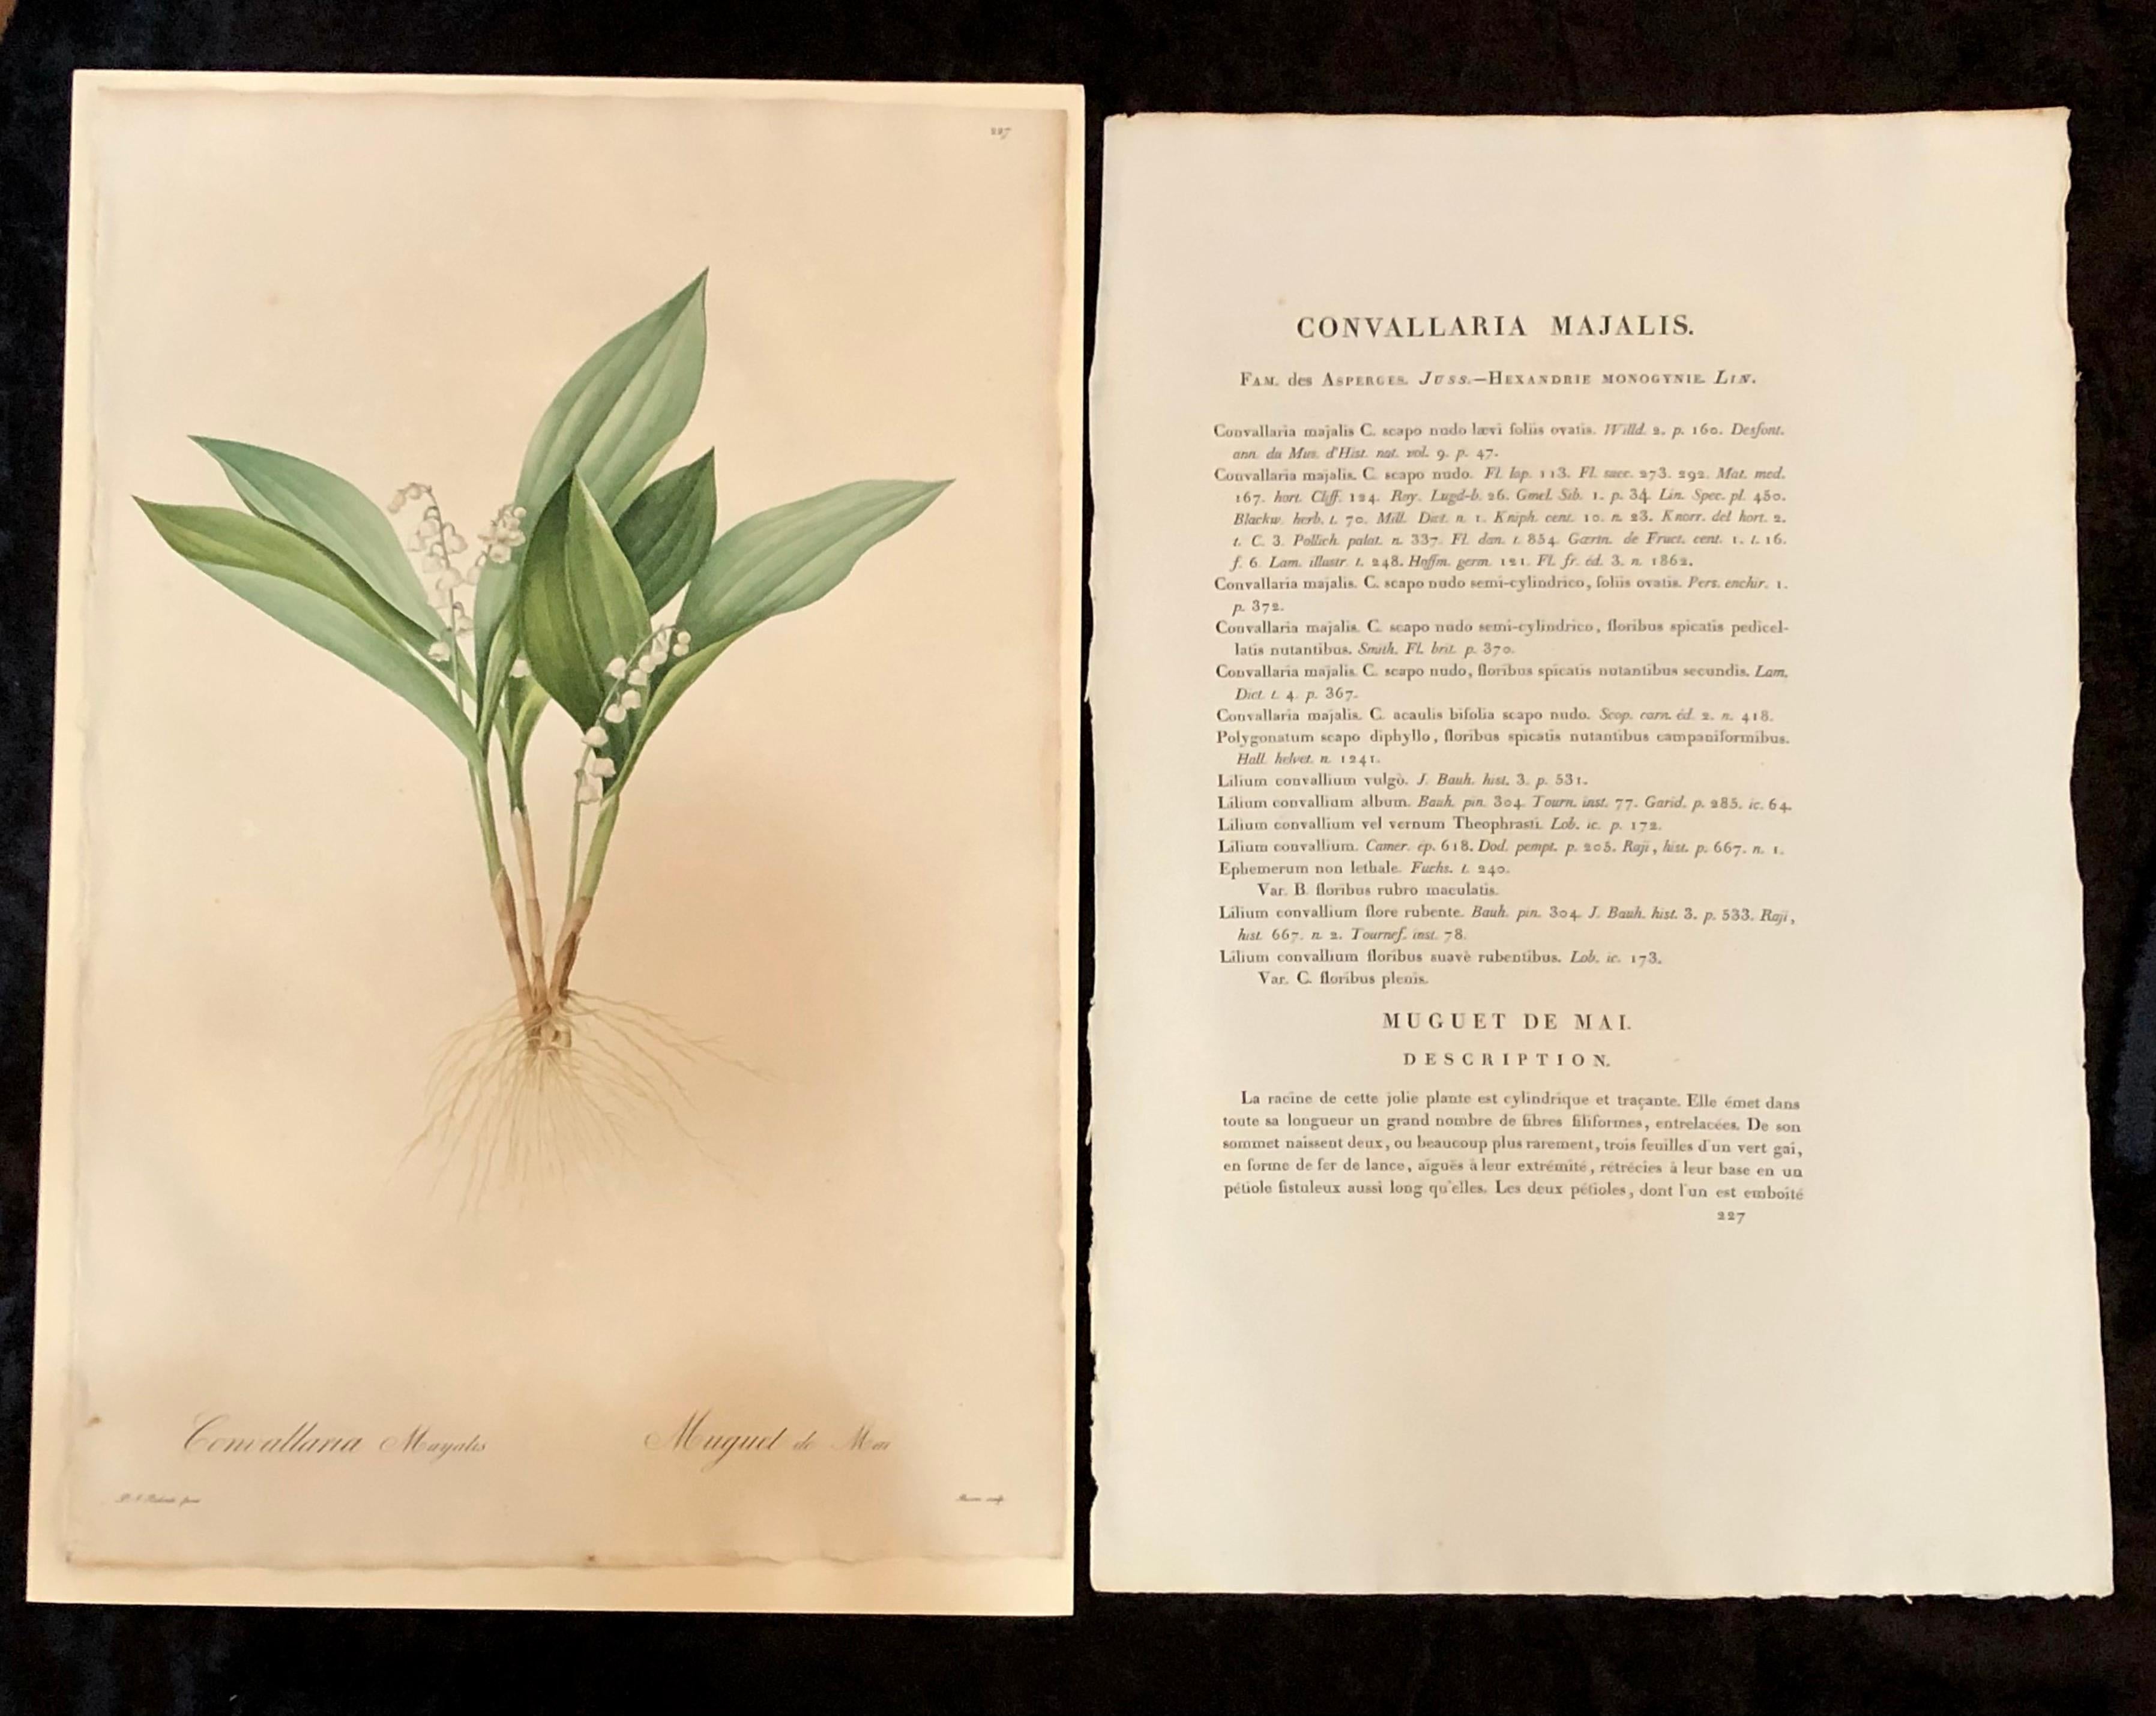 Minimalist Convallaria Majalis Print Hand Colored Engraving Signed P.J. Redoute For Sale